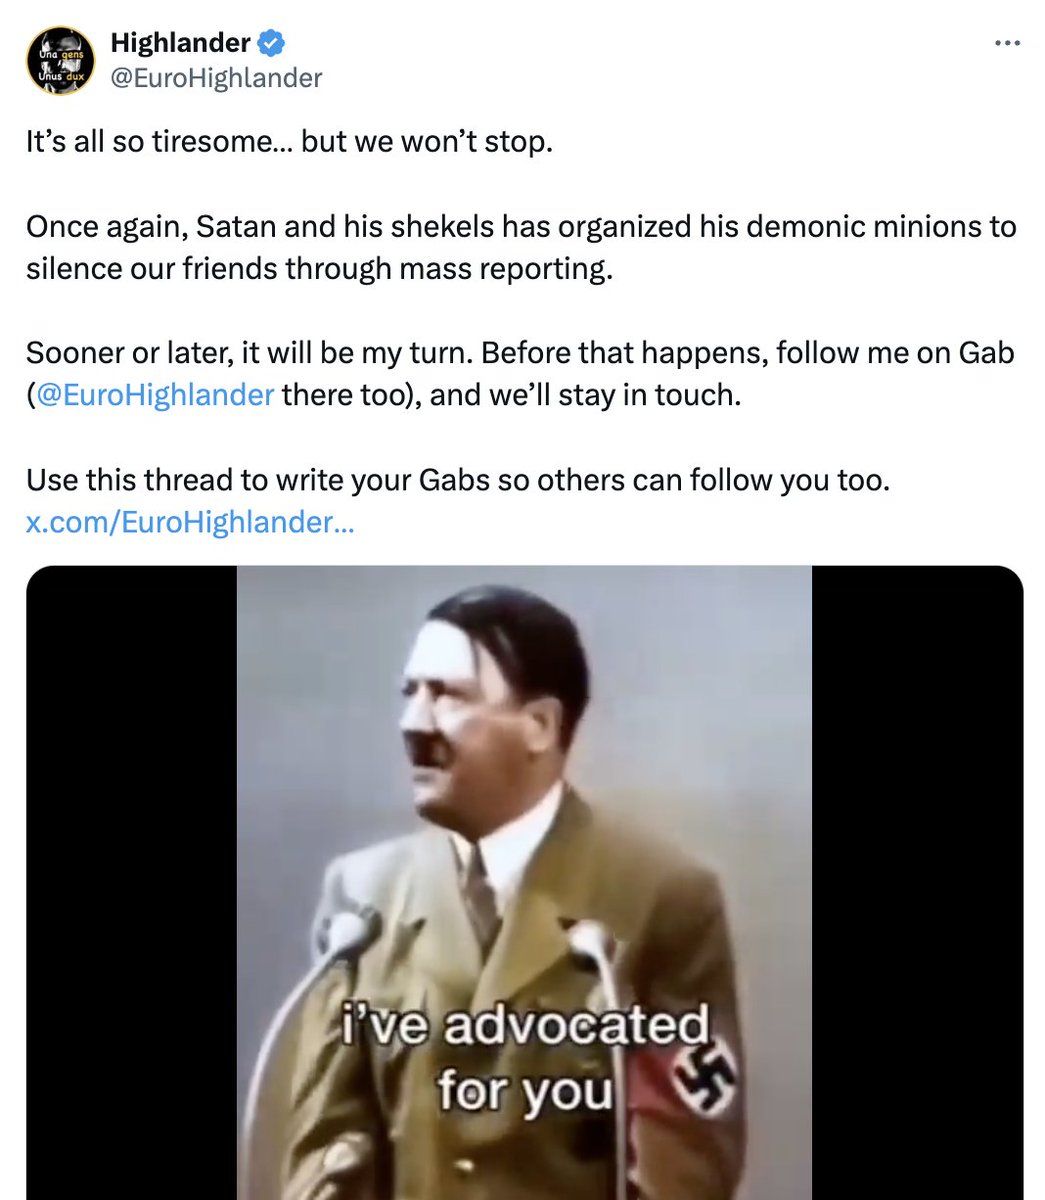 'NBC News sought comment on its findings from X... Hours later, @X had put labels on some of the examples, all of which remained online. Representatives for X did not answer written questions or agree to an interview'

Hitler video remains intact on X. 

#BrandSafety #Advertising